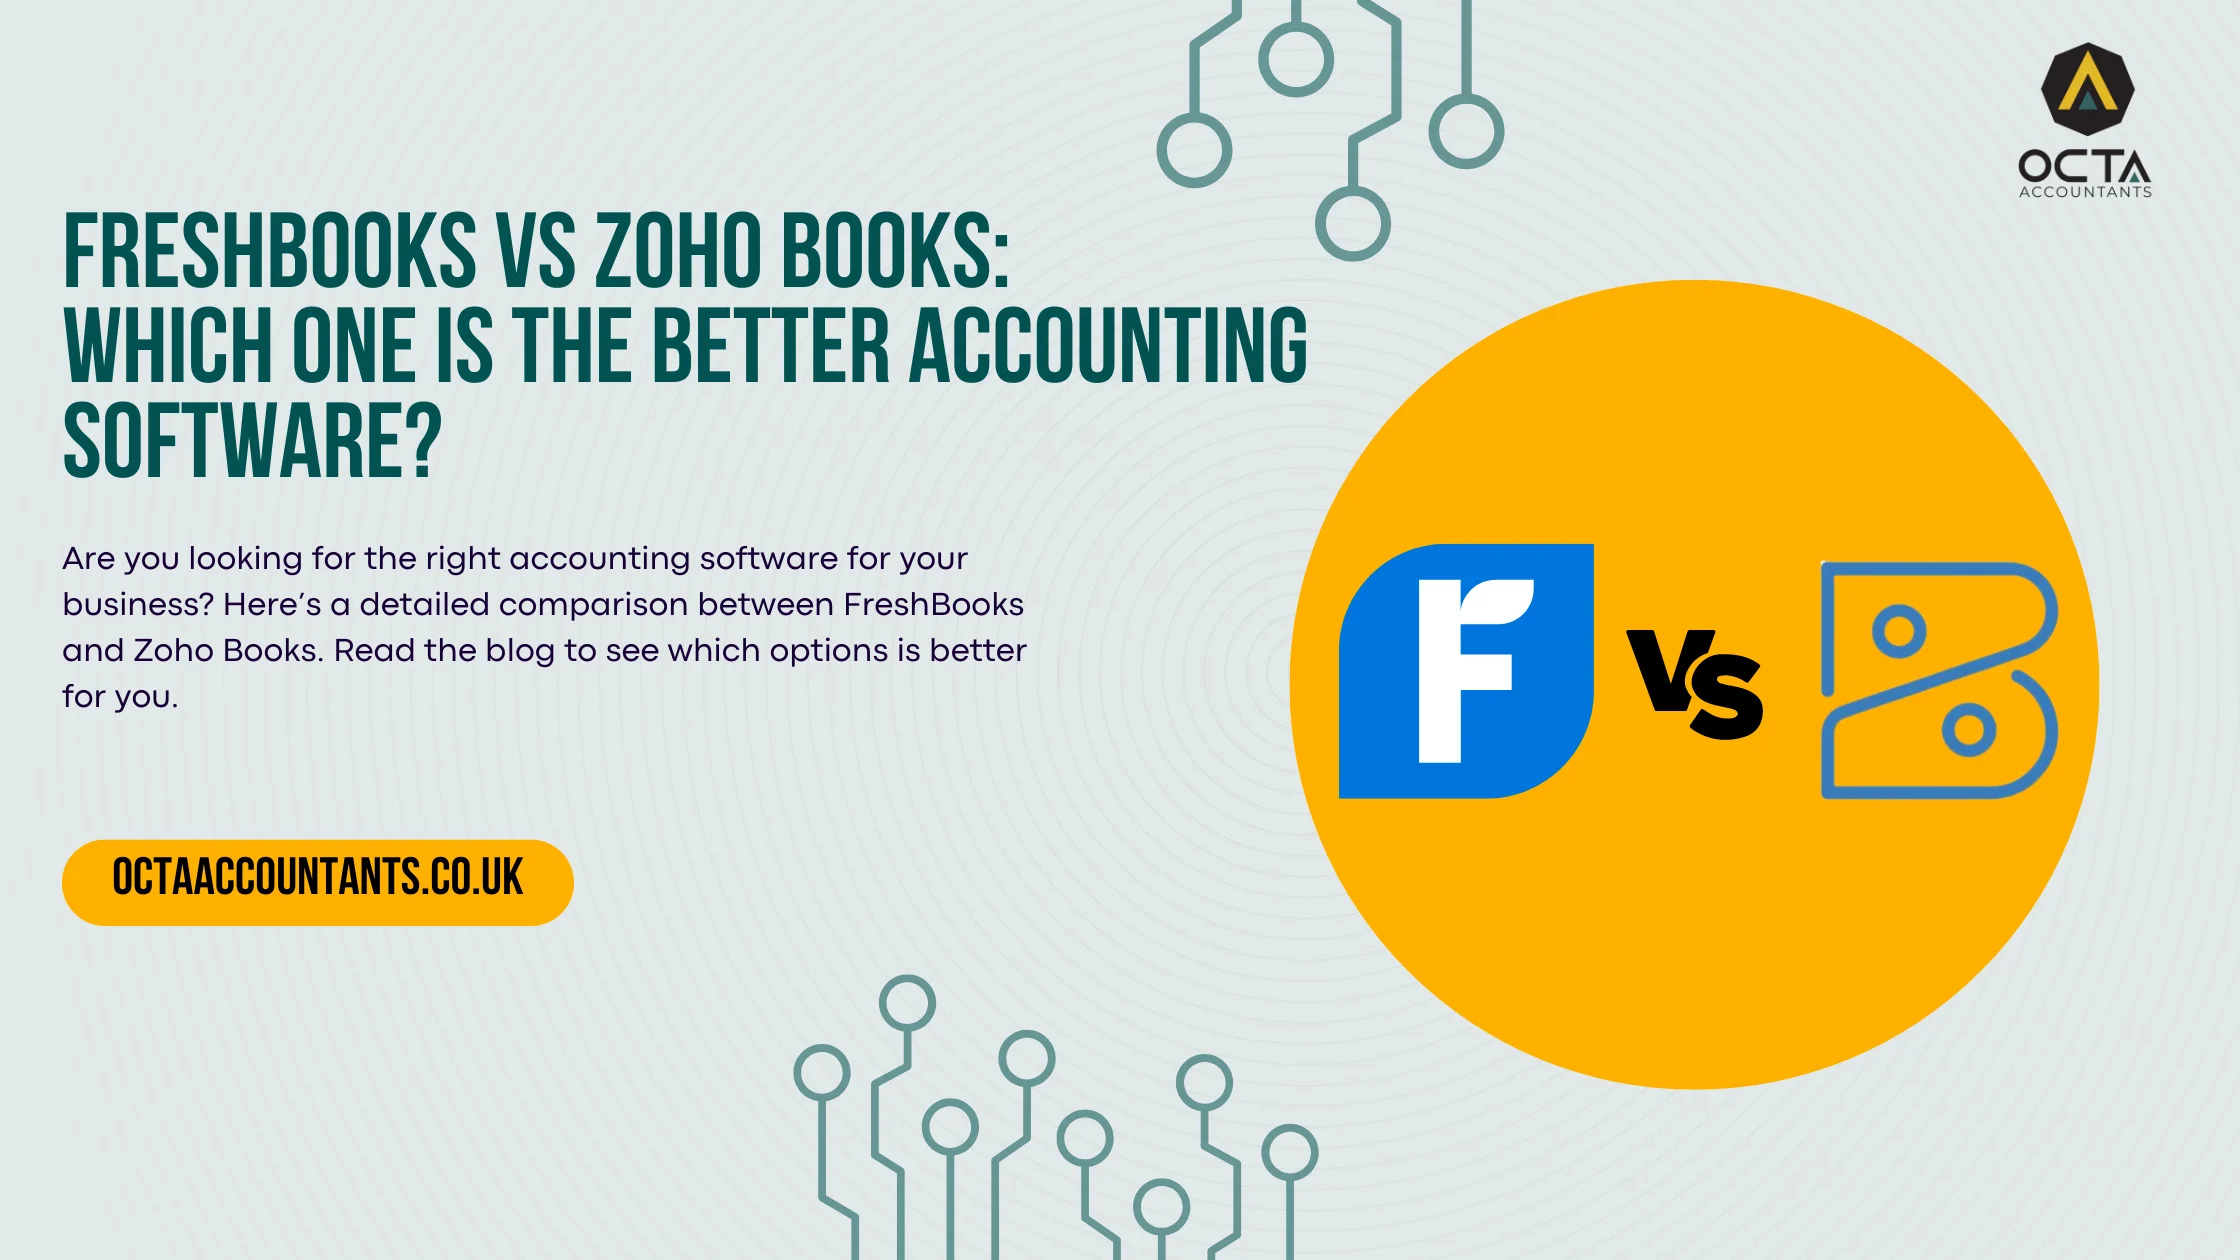 FreshBooks VS Zoho Books: Which one is a better accounting software for you?